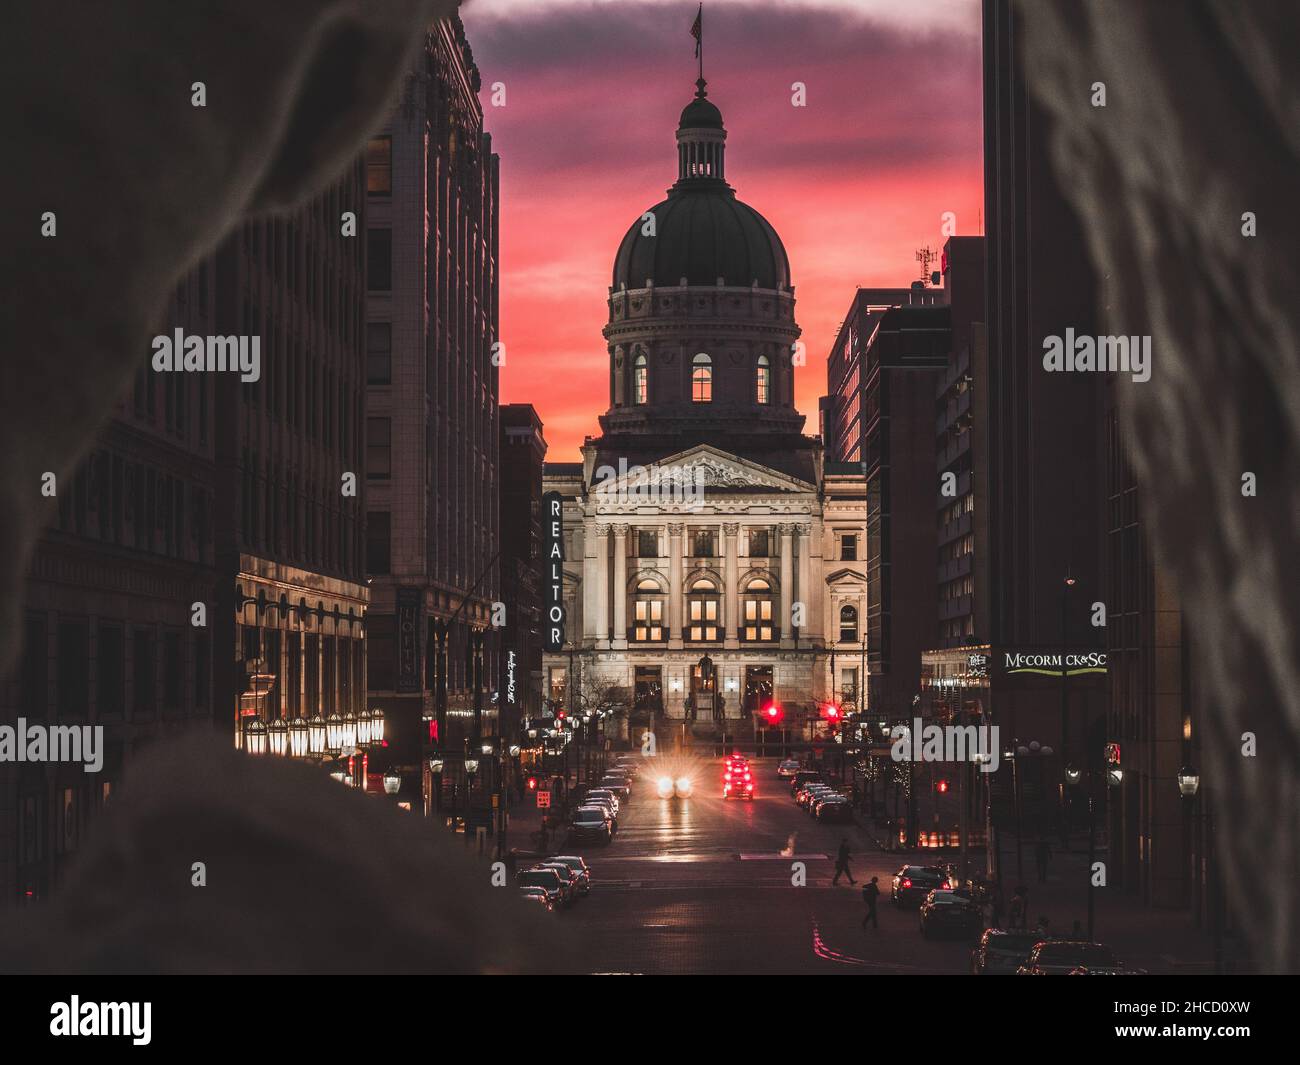 A mesmerizing view of the Soldiers' and Sailors' Monument in the city of Indianapolis, USA Stock Photo